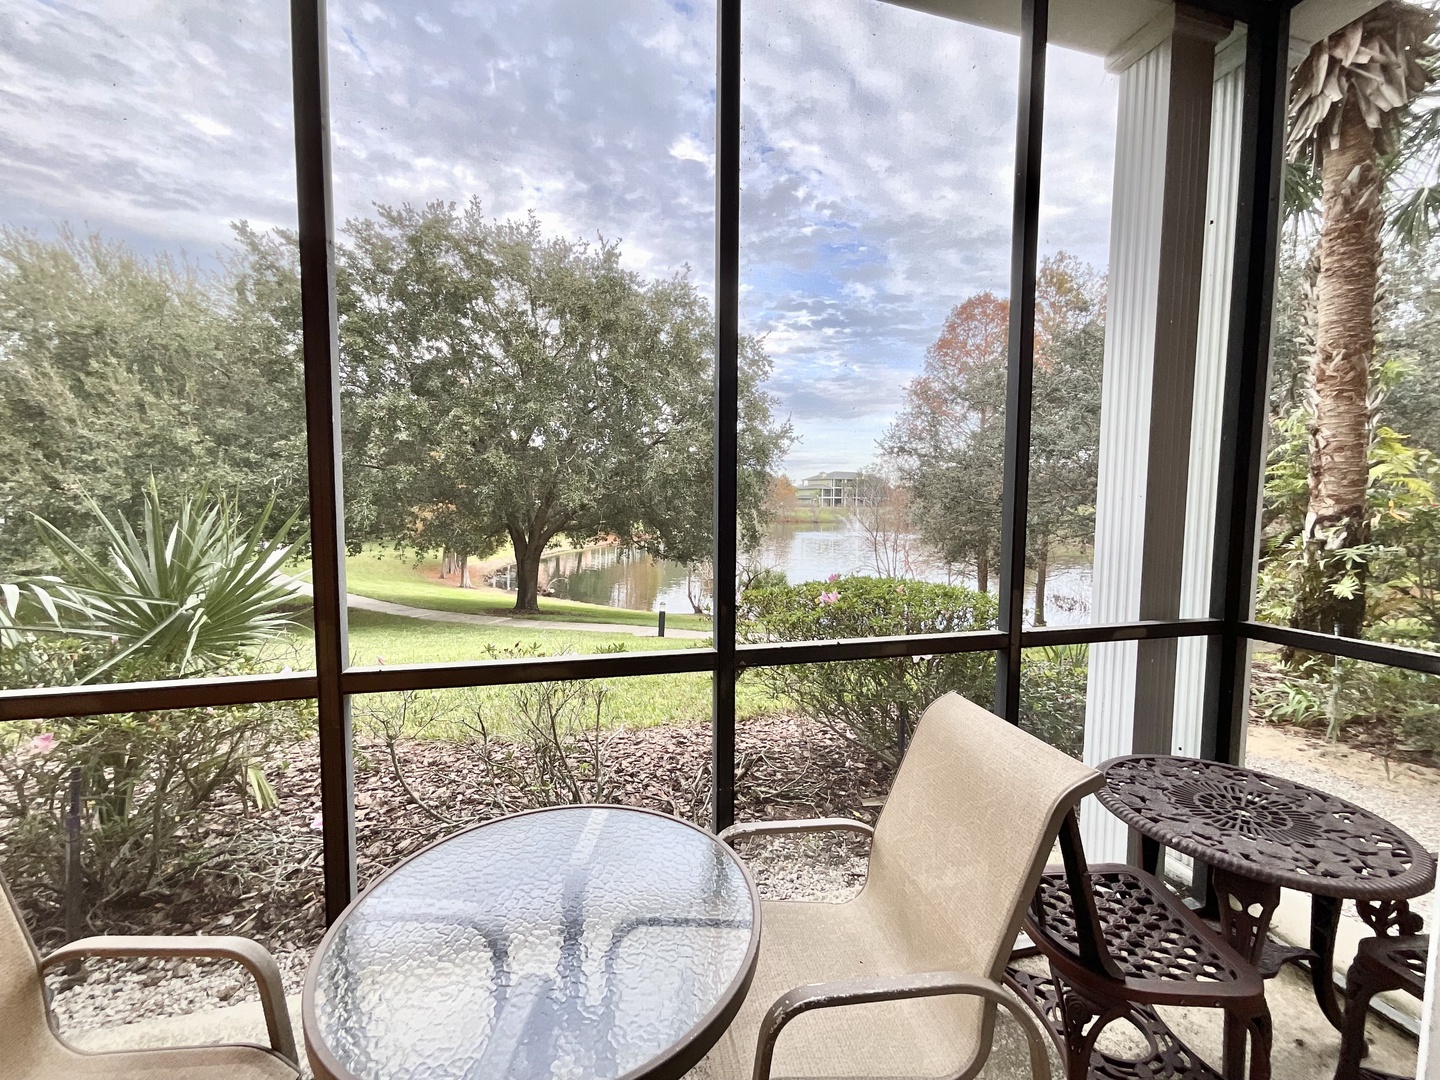 Lounge or dine with stunning water views on the screened patio